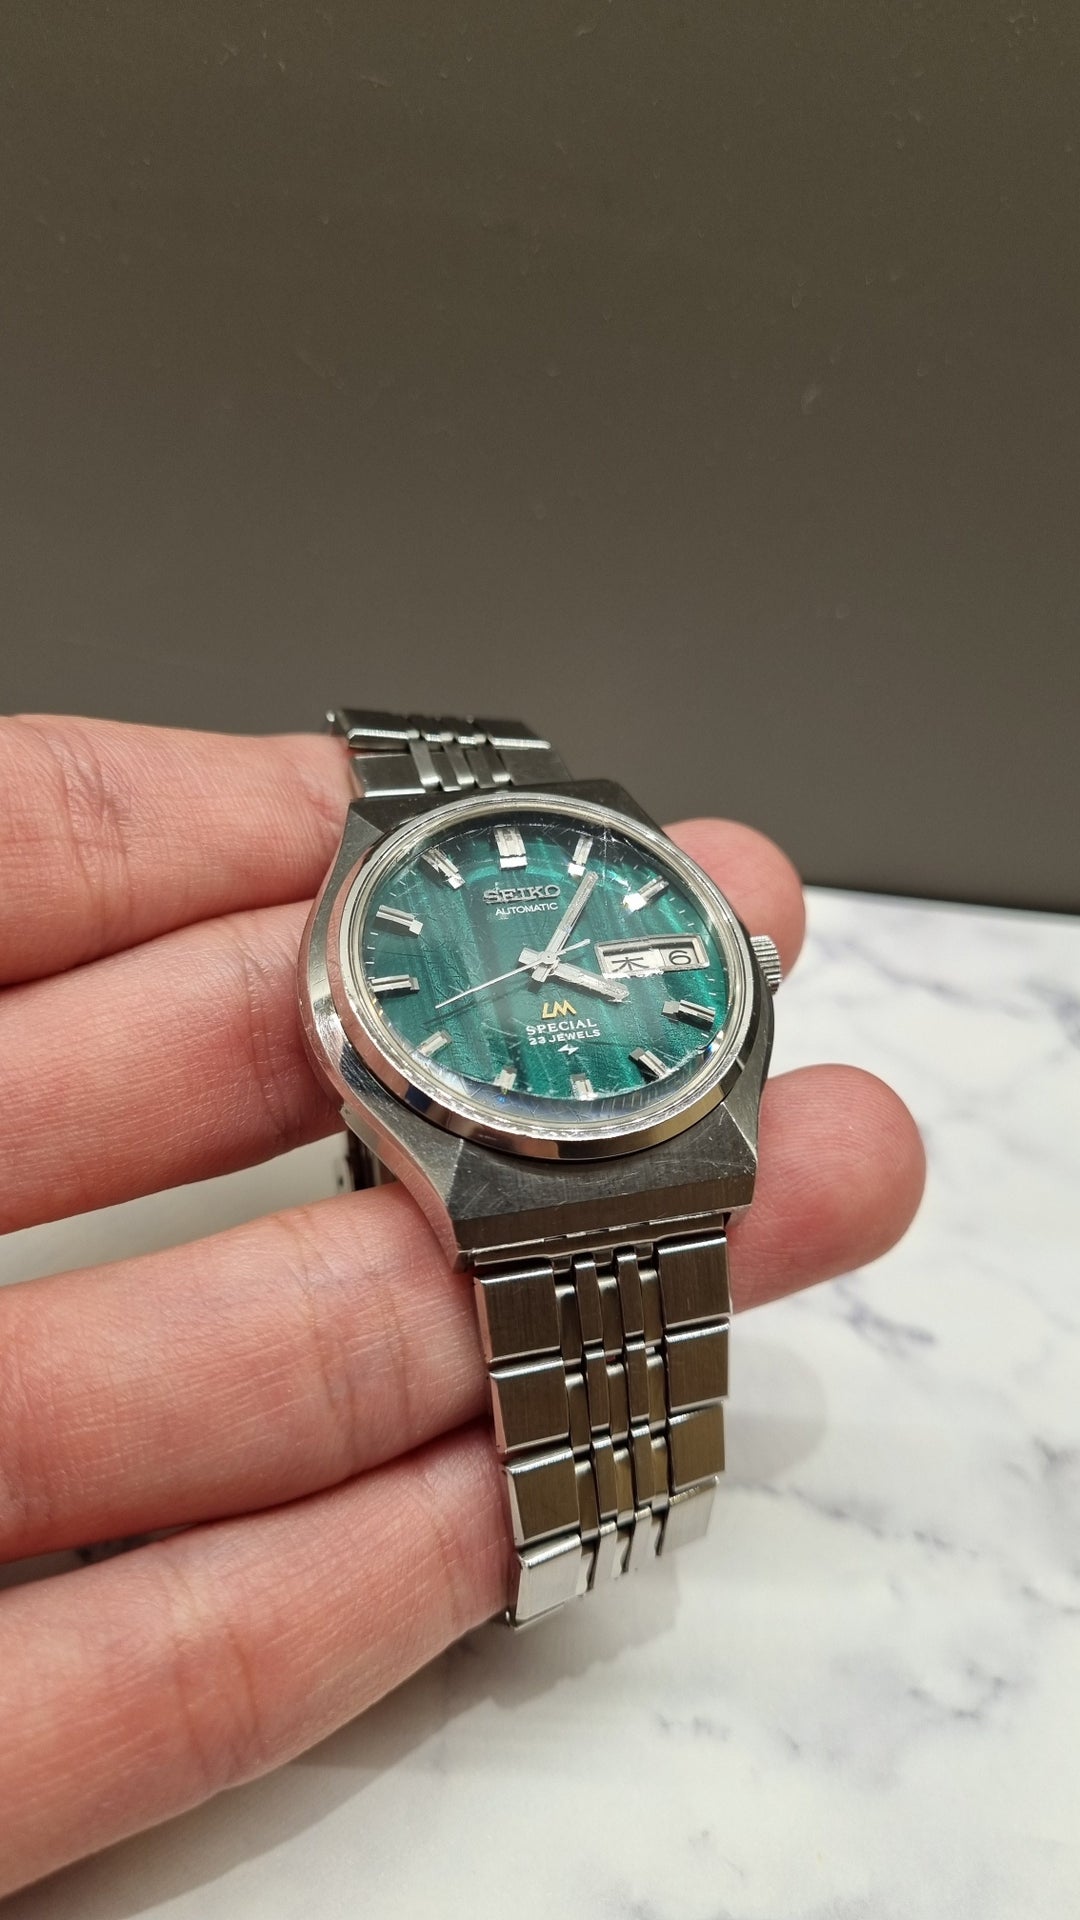 Seiko Rare 52 LM Special 5216-7040 Green Dial w/ Faceted Crystal and  Bracelet - $250 | WatchUSeek Watch Forums